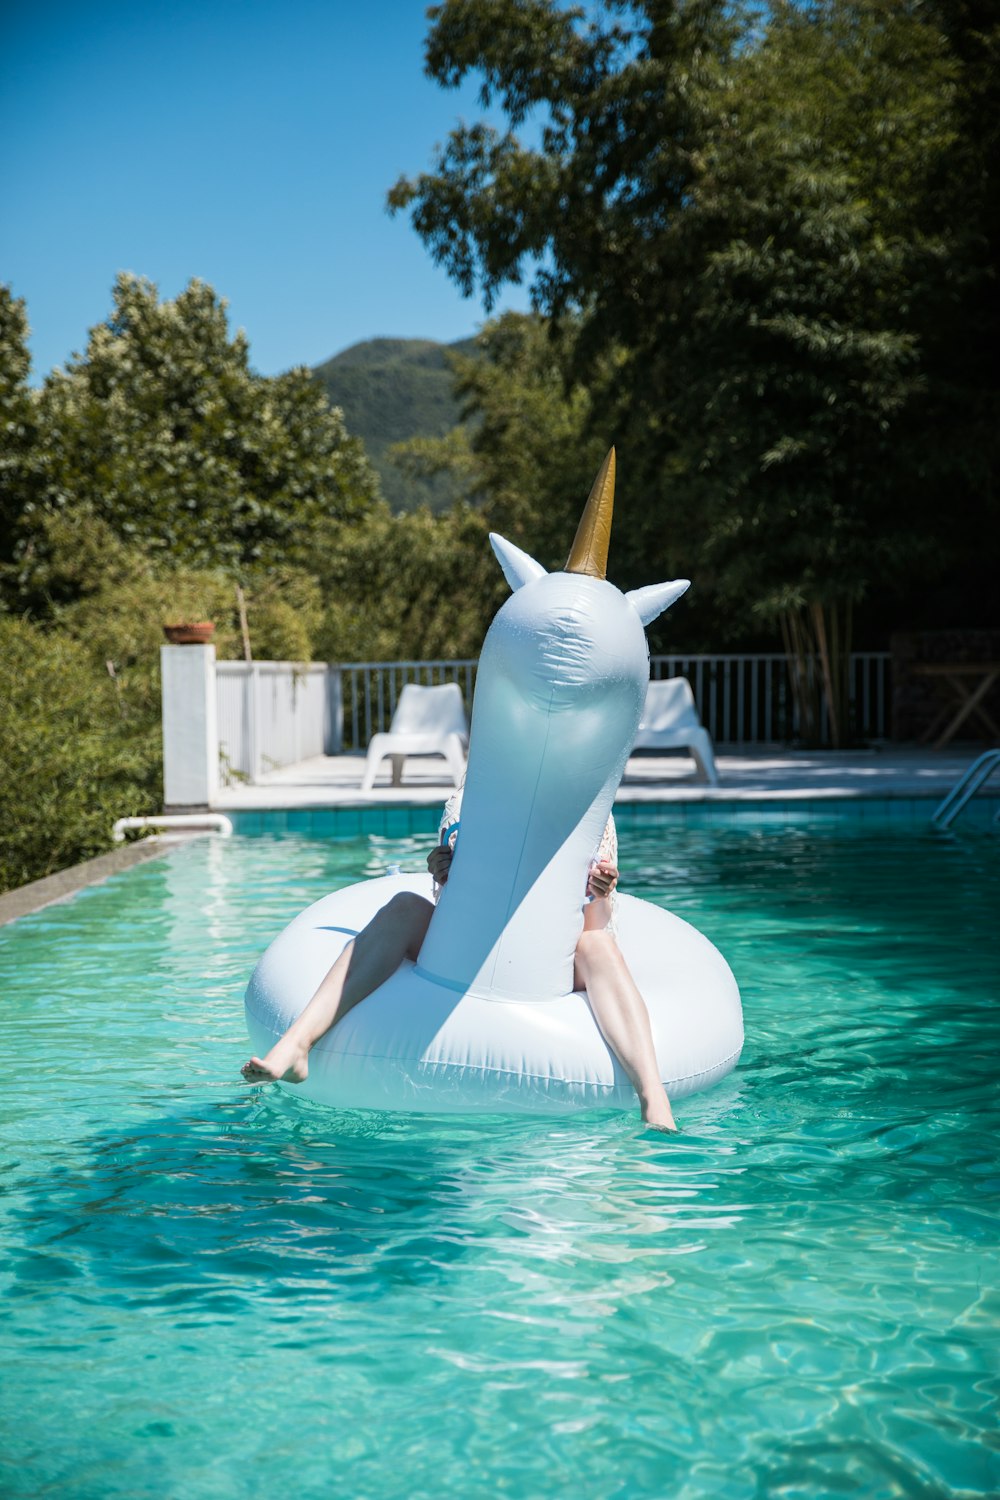 person riding unicorn inflatable ring on body of water